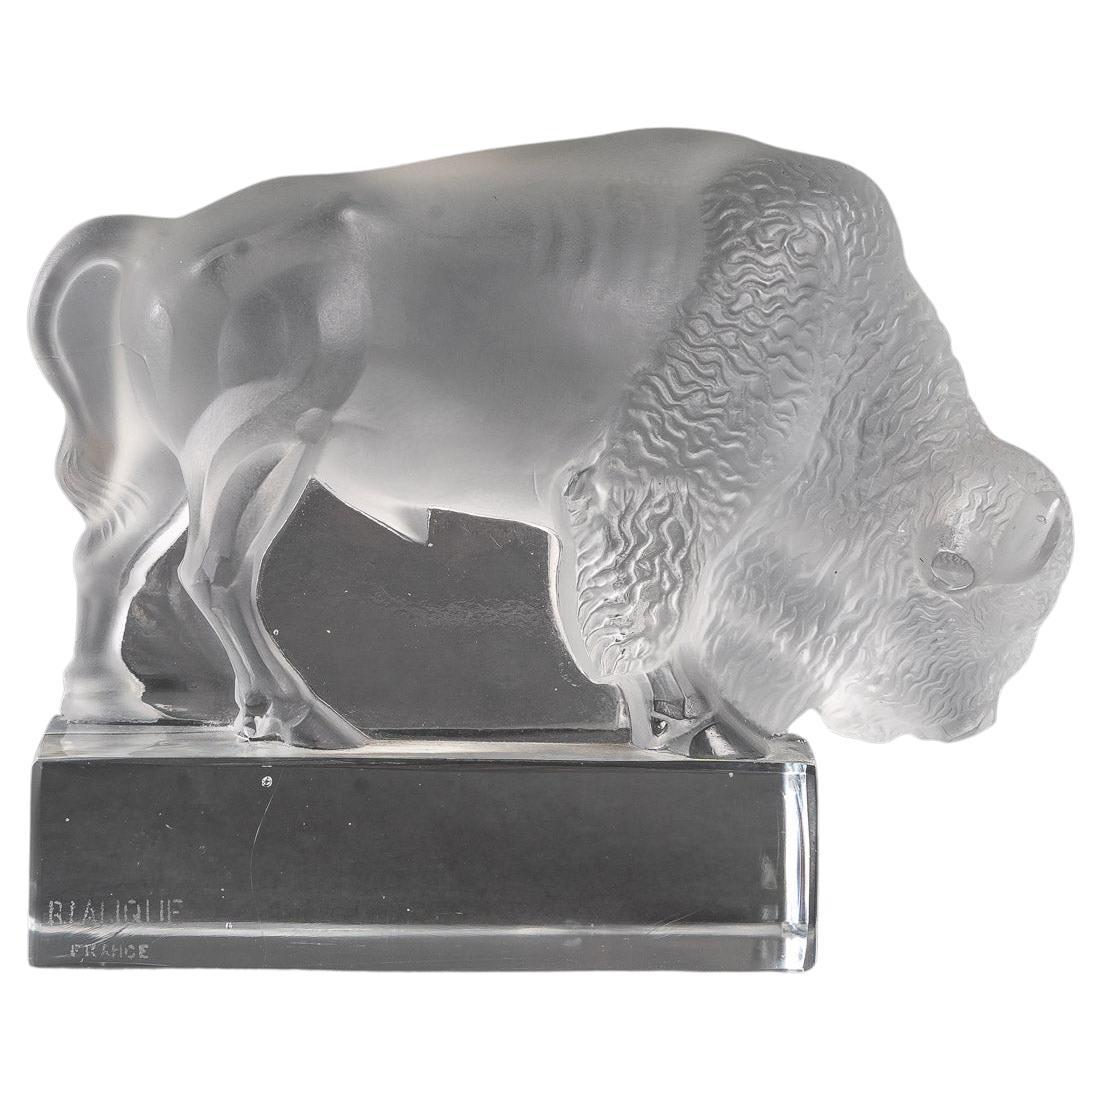 1931 René Lalique, Bison Paperweight Frosted Glass